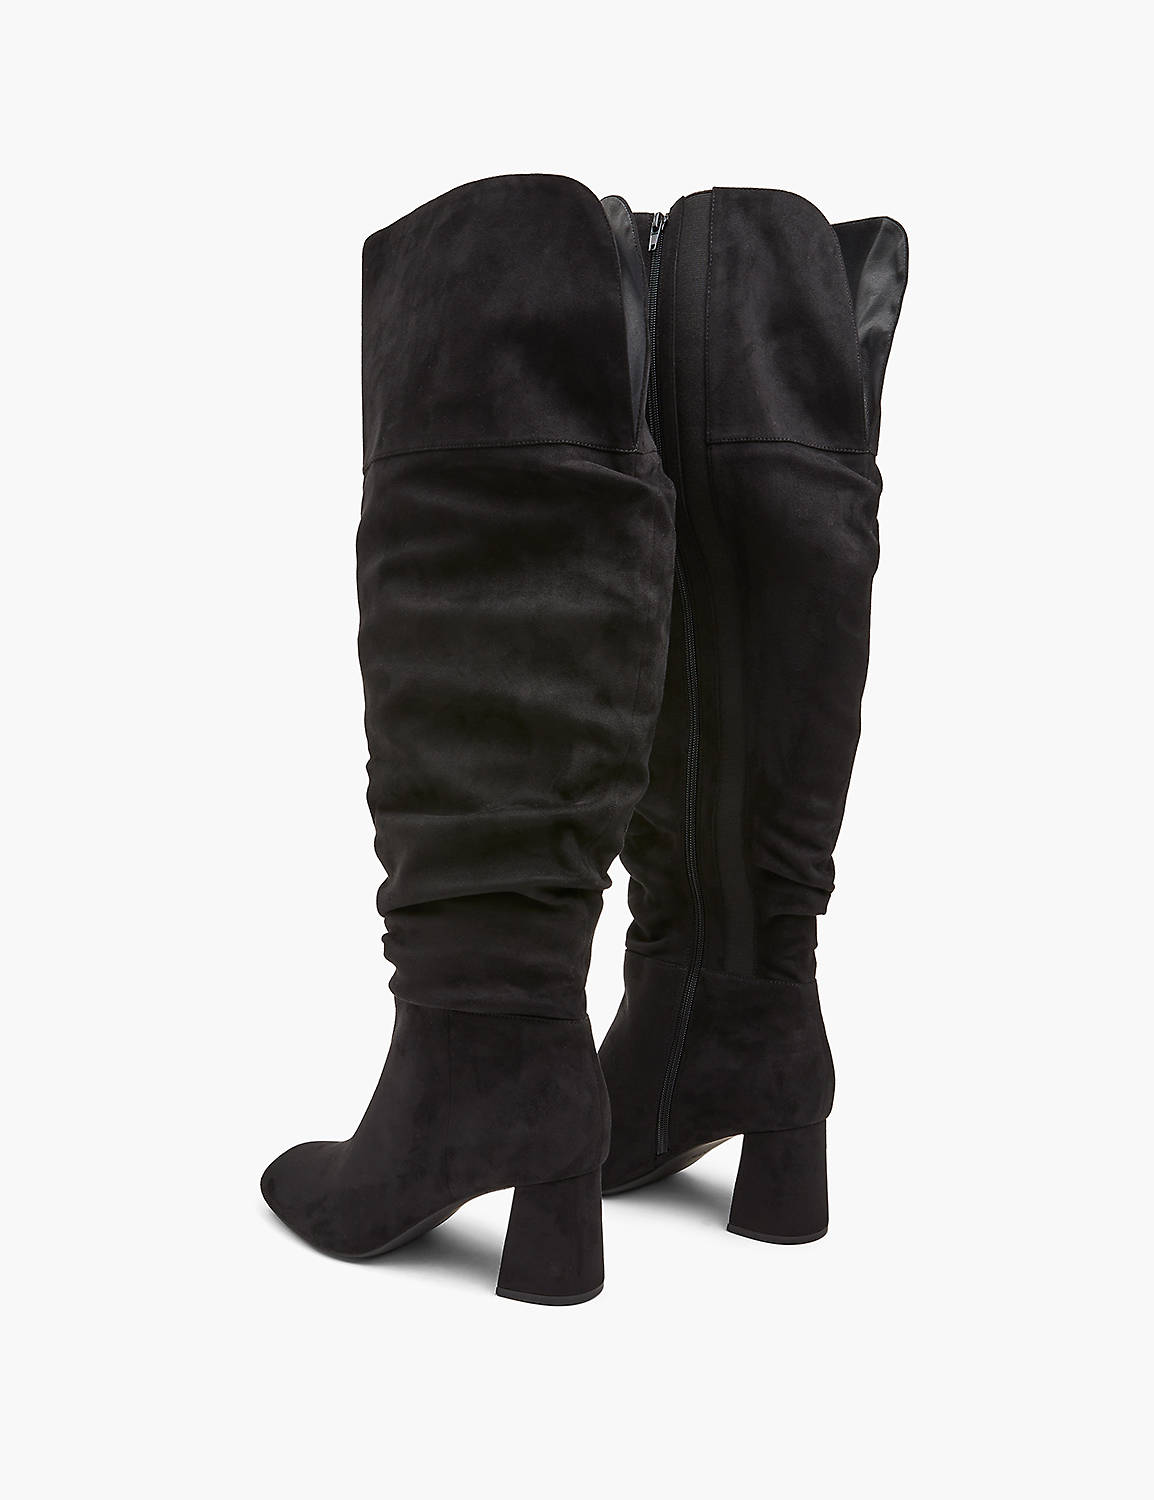 SLOUCH OVER THE KNEE BOOT Product Image 2